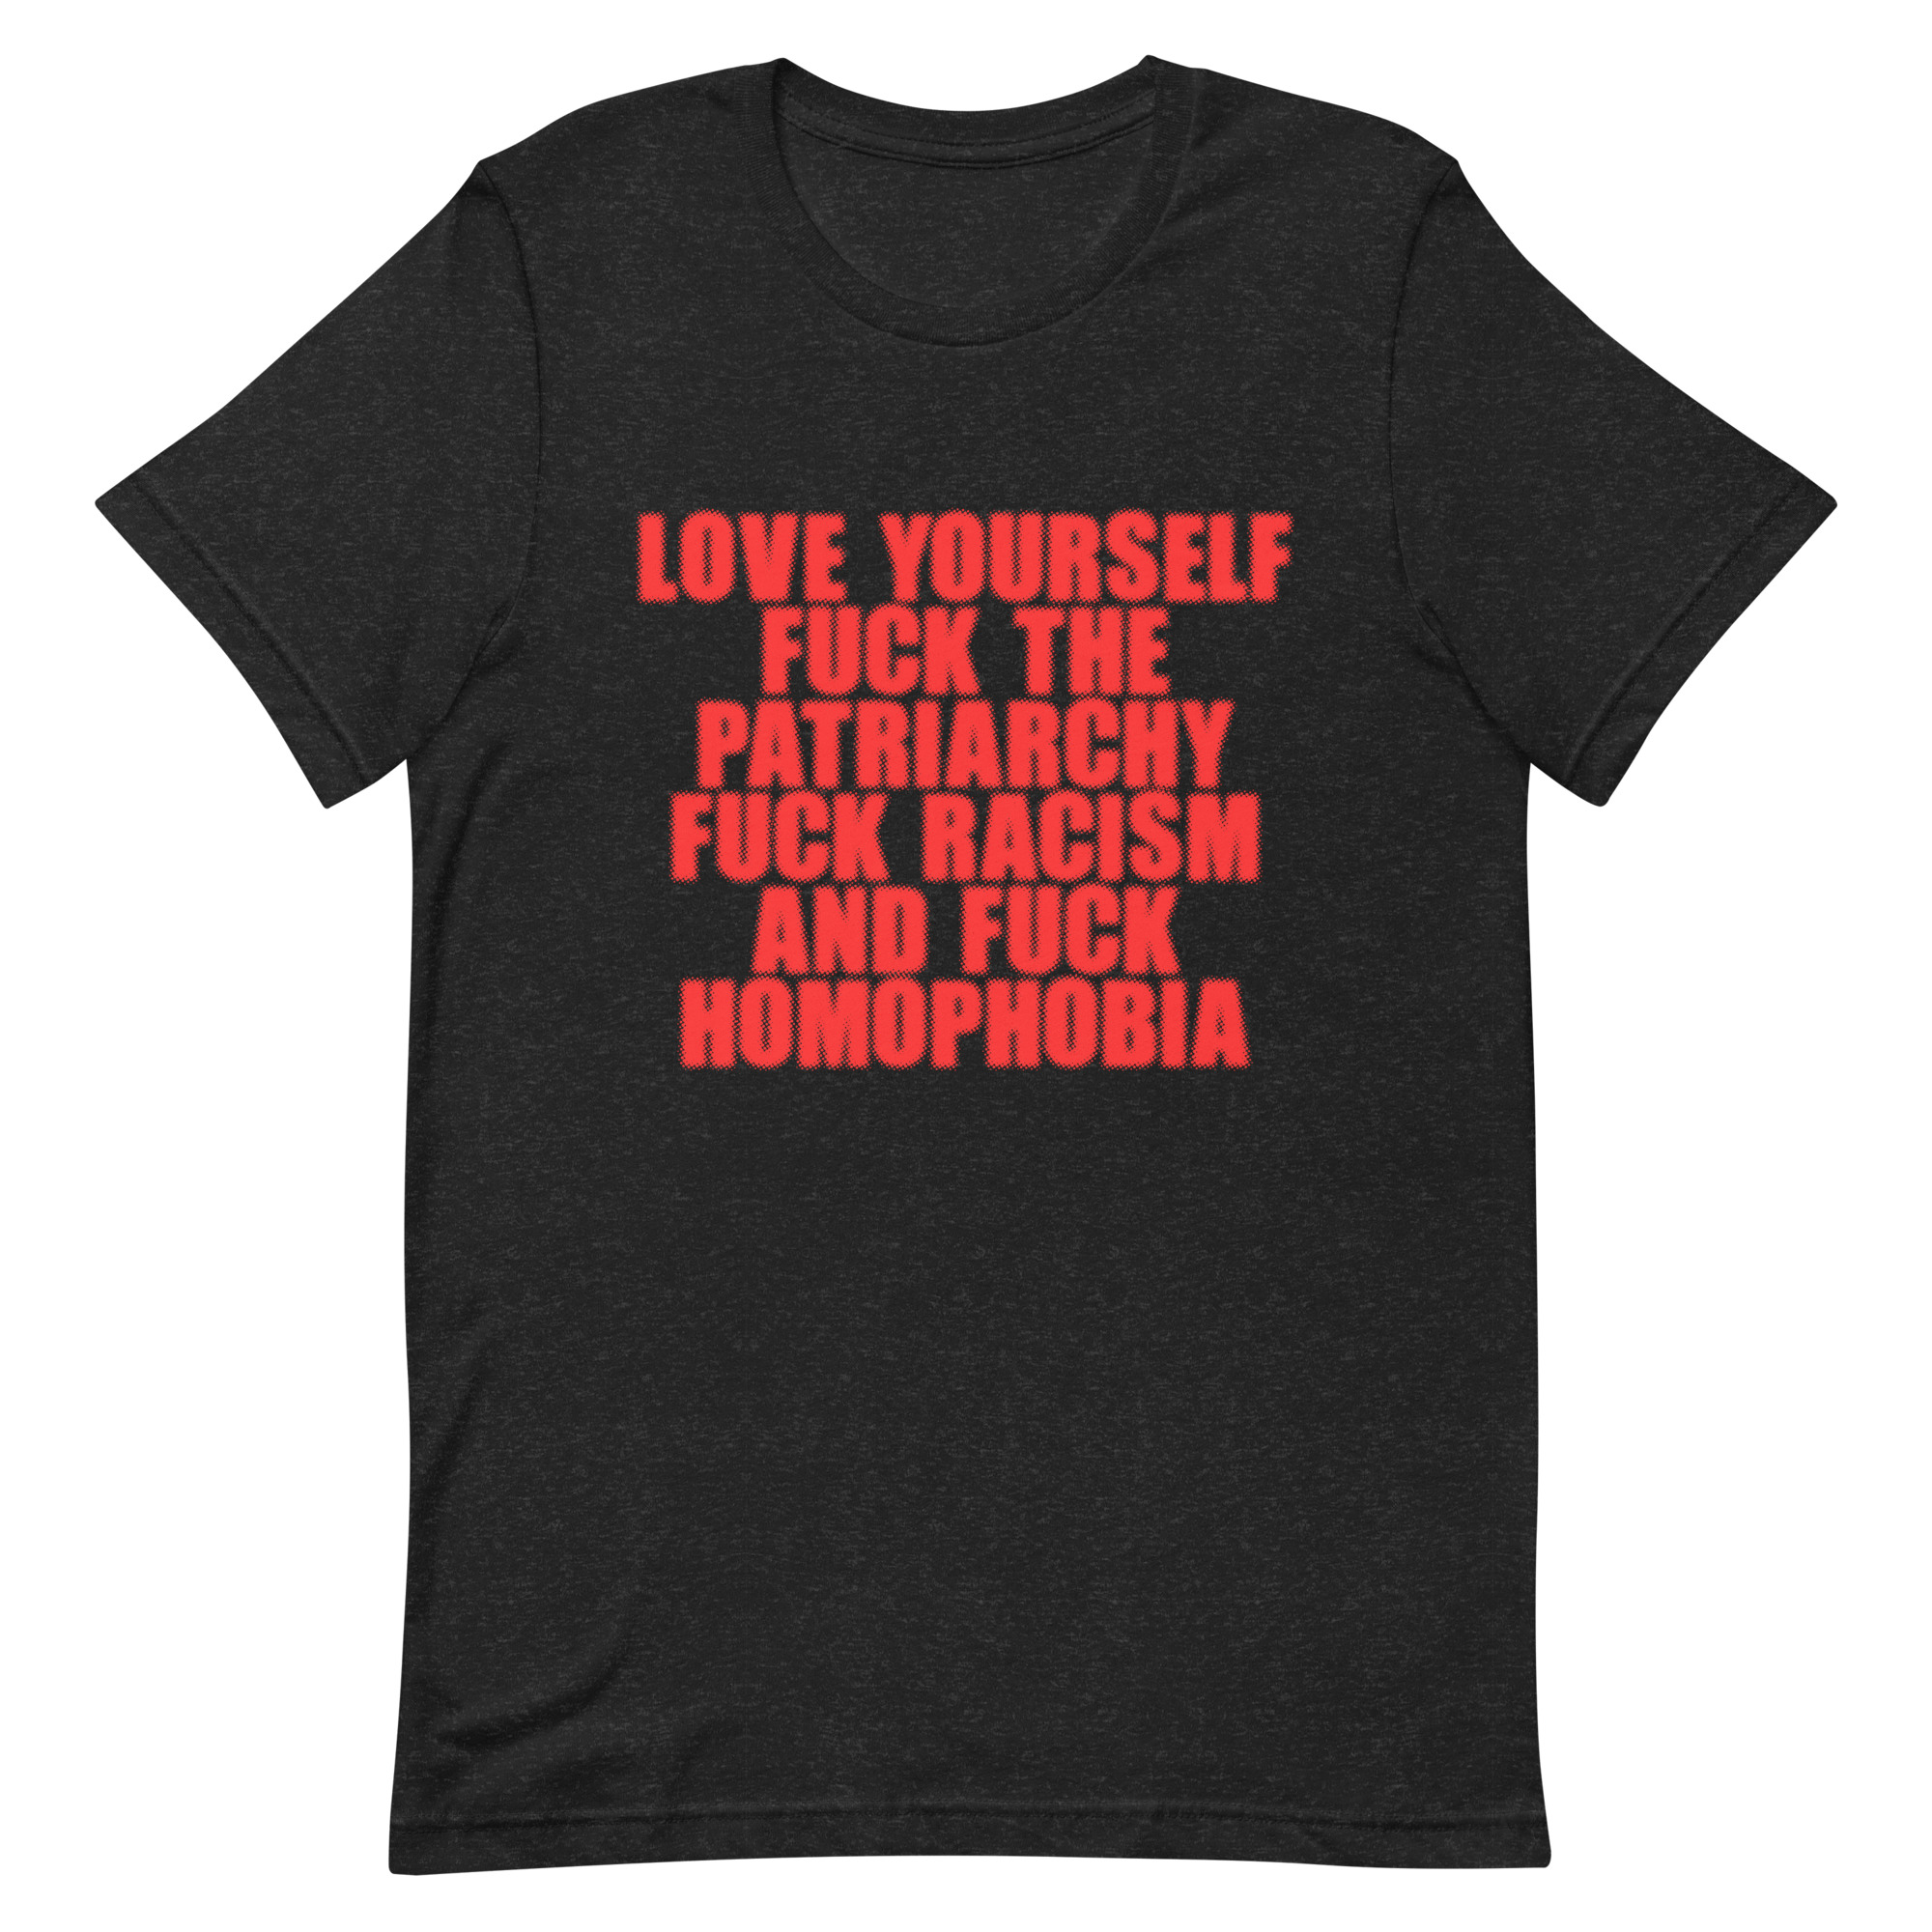 Featured image for “Love Youself Fk the Patriarchy  - Unisex Bella + Canvas t-shirt”